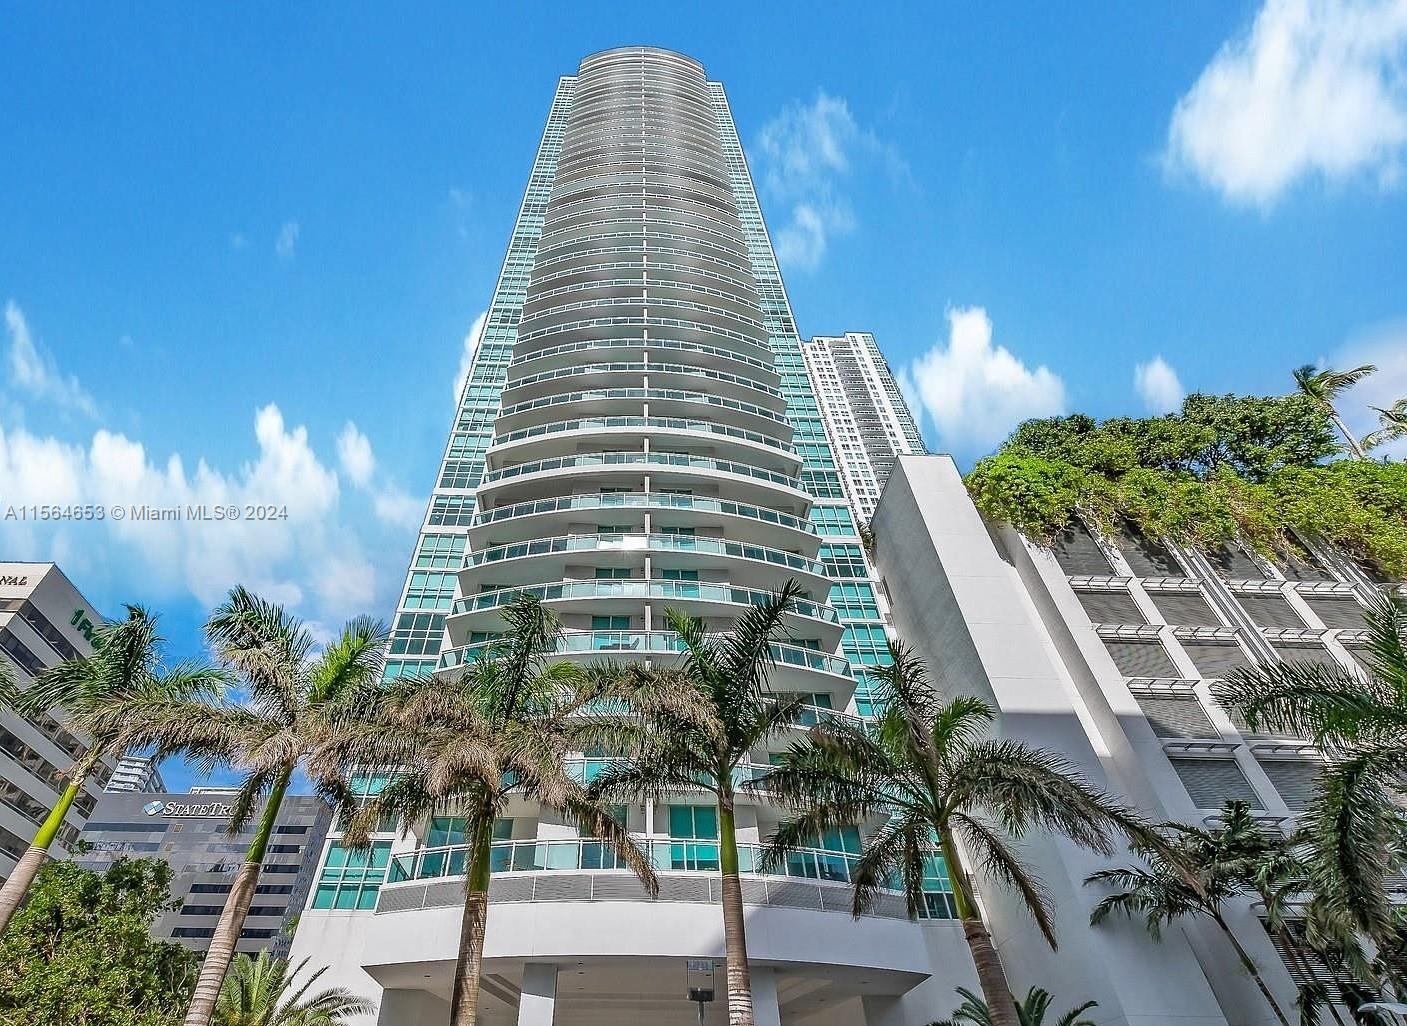 The Plaza condo in the heart of Brickell. Enjoy this high floor furnished one bedroom one bath with an amazing open Brickell skyline view. Unit faces west with nightly city lights twinkling. Beautiful fully equipped kitchen with stainless steel appliances & granite counter tops. Open living space filled with natural light. Amenities include resort style pool & jacuzzi, assigned covered parking, BBQ area, fitness center, Social Room & Billiards, business center, 24 hour concierge and valet parking service. Walking distance to Brickell City Center, the bay, shops & restaurants, cafes, churches & public transportation. Best location in Brickell.